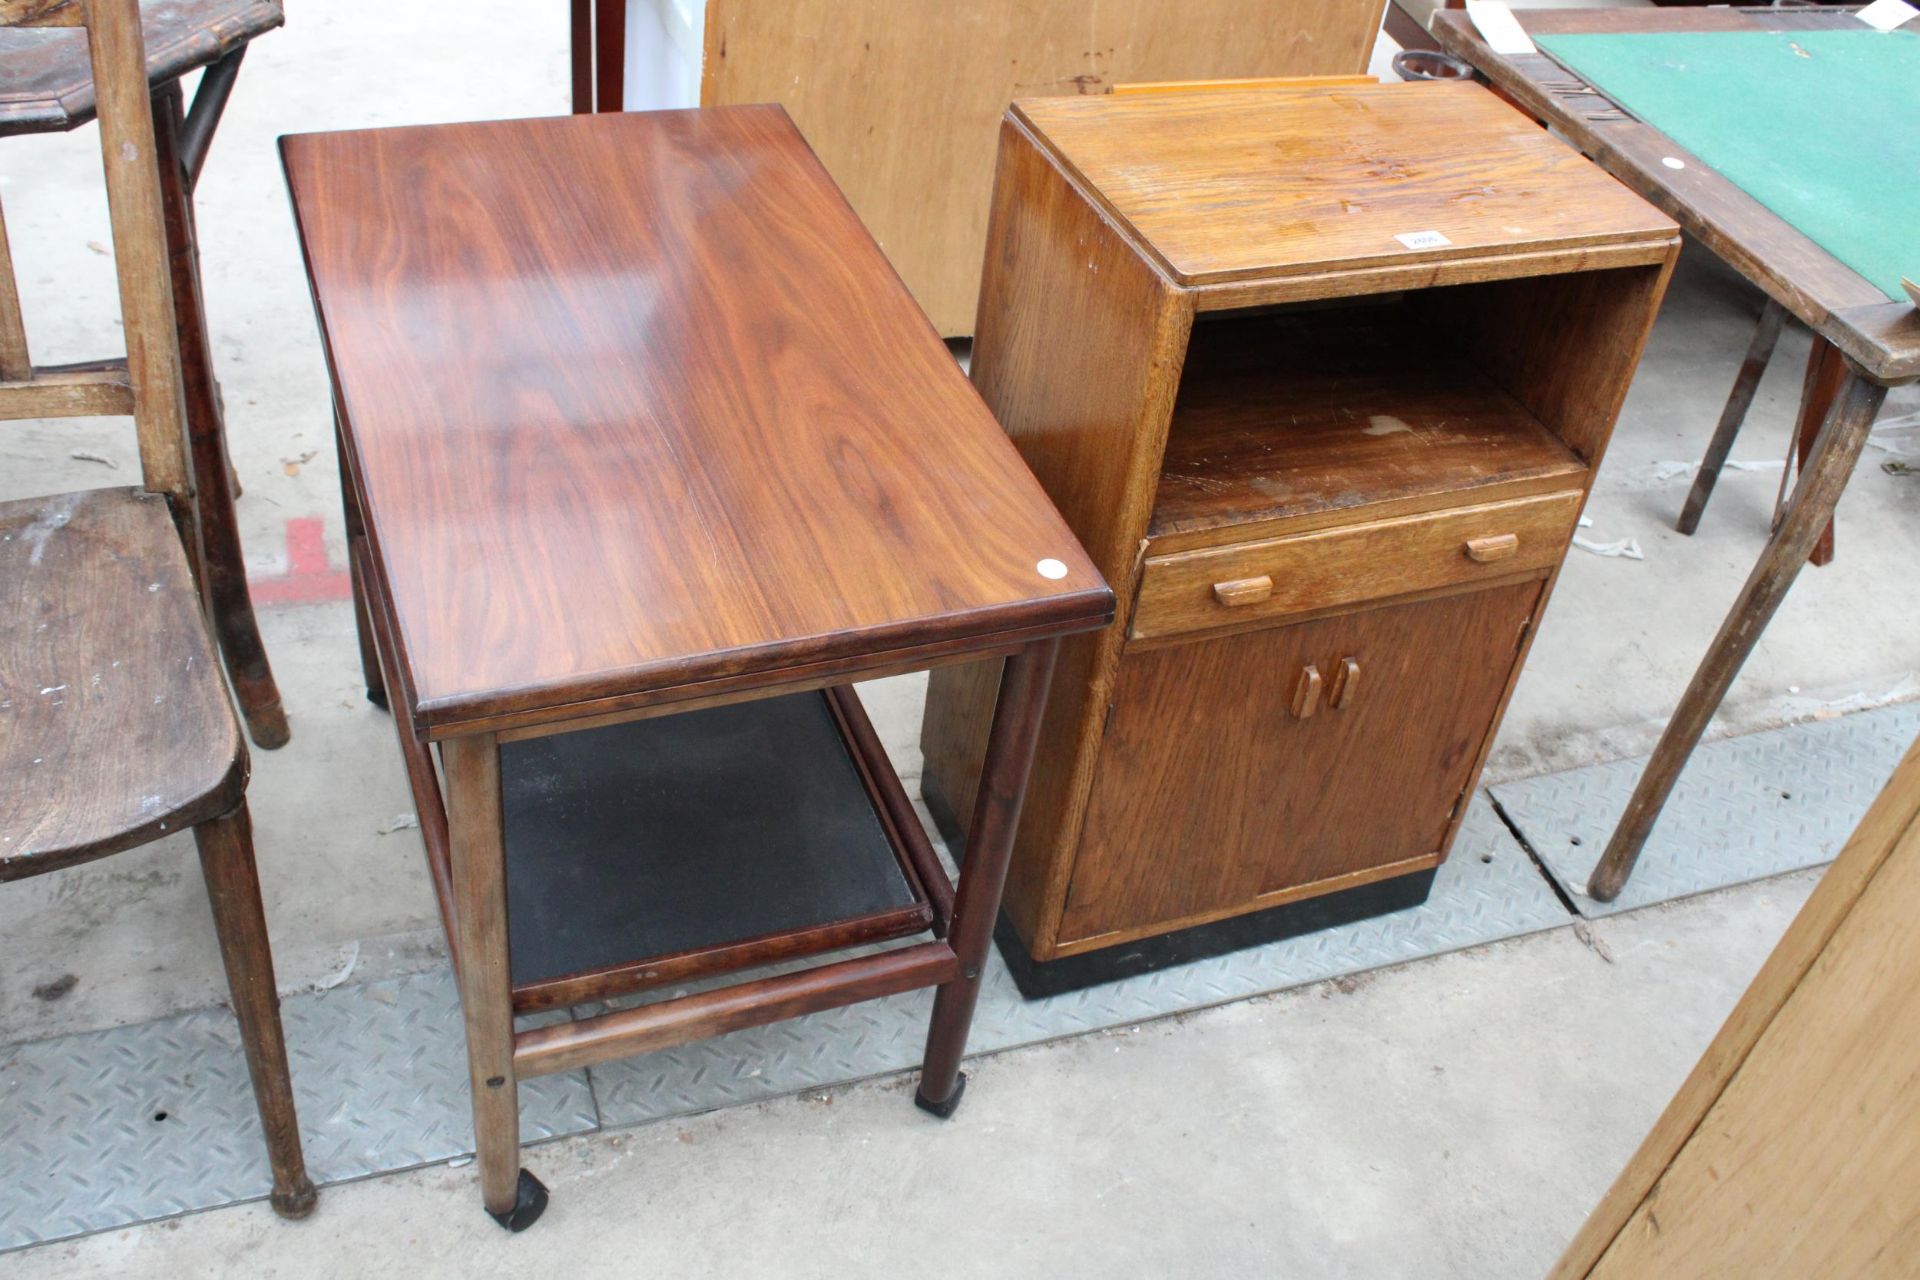 A MID 20TH CENTURY OAK BEDSIDE LOCKER AND MODERN MAHOGANY TWO TIER FOLD OVER TROLLEY WITH DETACHABLE